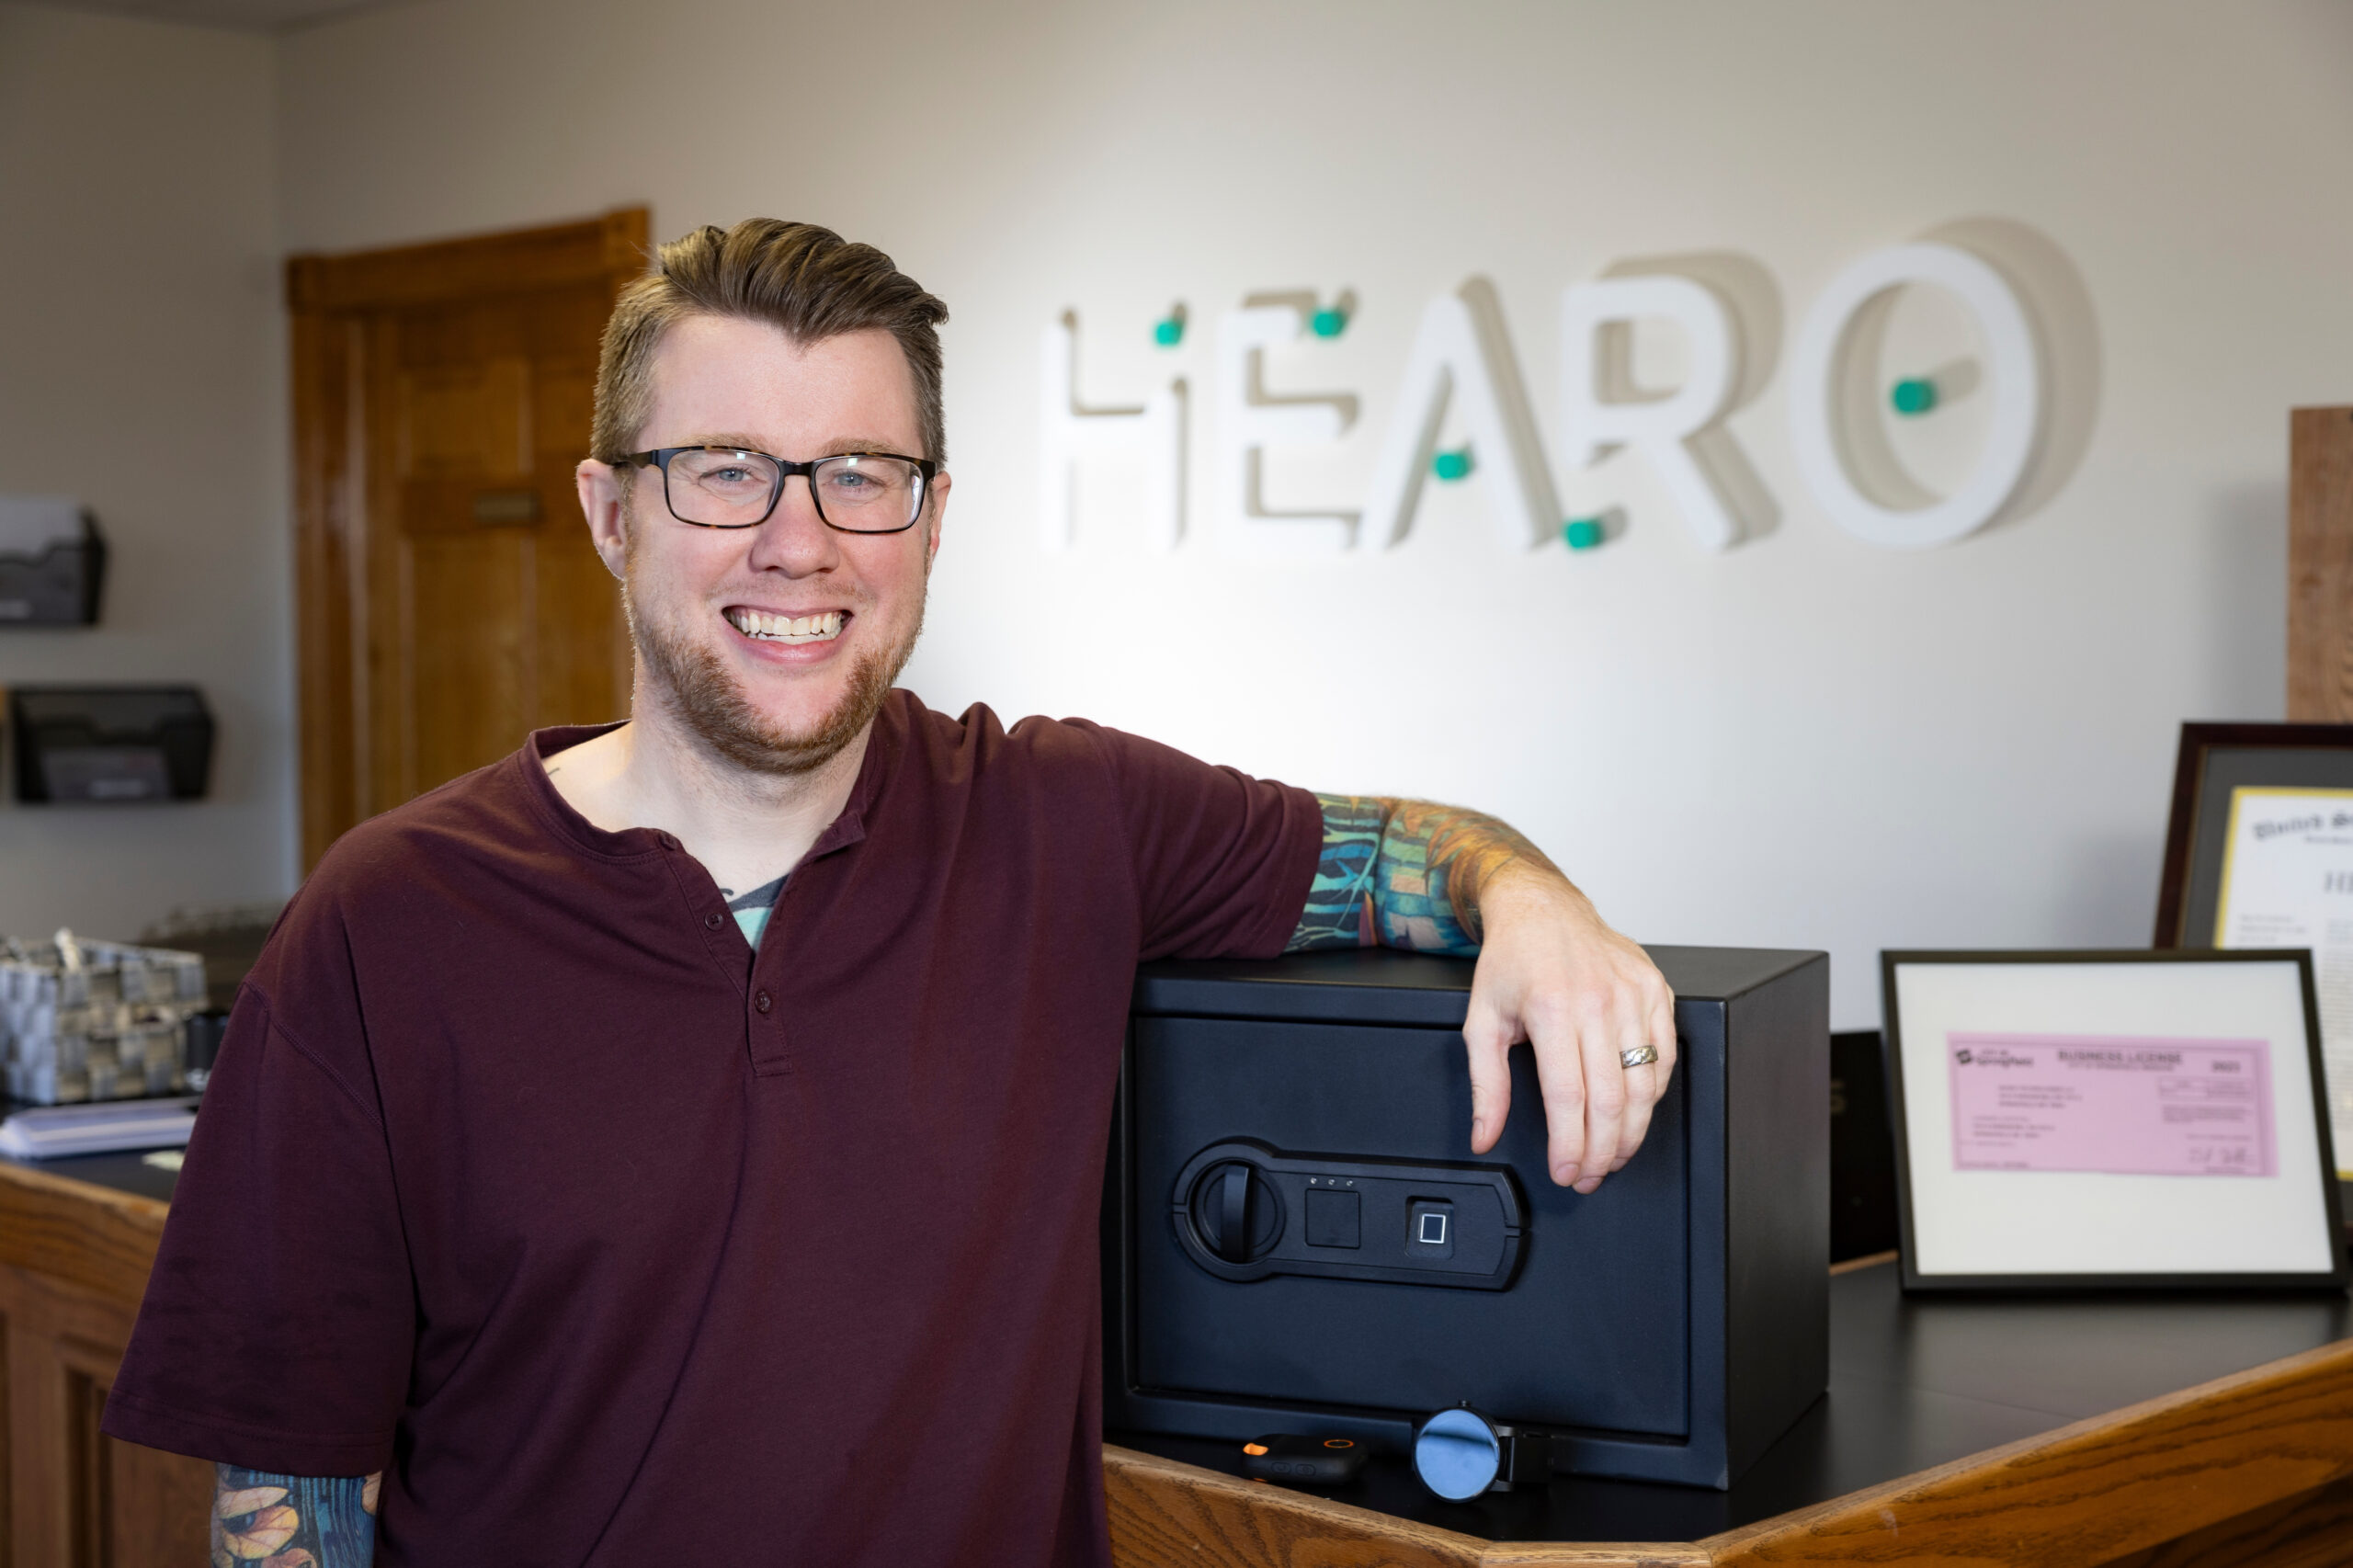 Myke Bates, CEO of HEARO, showcases new product in remote supports field.